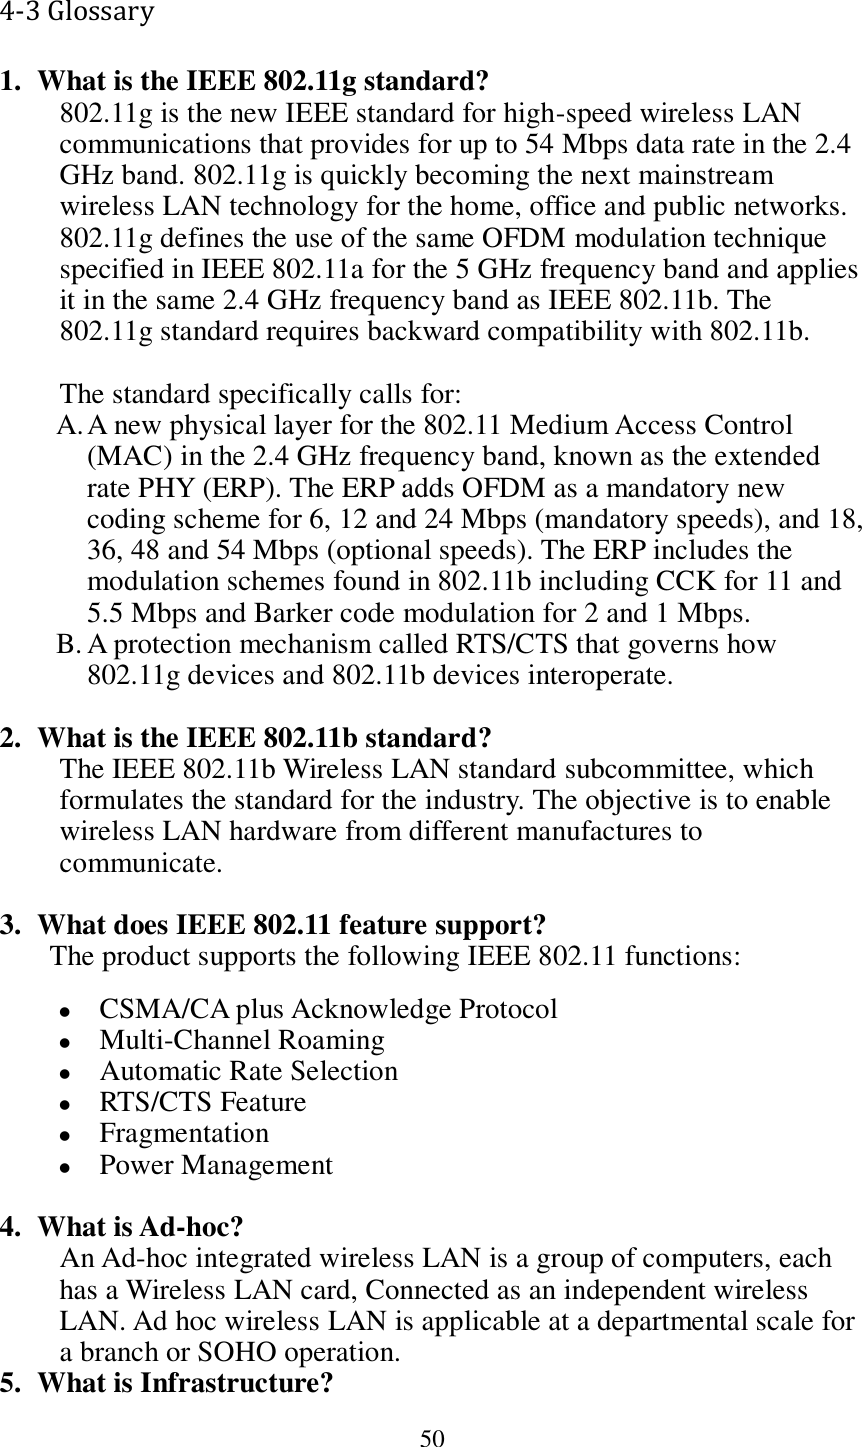  50 4-3 Glossary 1. What is the IEEE 802.11g standard? 802.11g is the new IEEE standard for high-speed wireless LAN communications that provides for up to 54 Mbps data rate in the 2.4 GHz band. 802.11g is quickly becoming the next mainstream wireless LAN technology for the home, office and public networks.   802.11g defines the use of the same OFDM modulation technique specified in IEEE 802.11a for the 5 GHz frequency band and applies it in the same 2.4 GHz frequency band as IEEE 802.11b. The 802.11g standard requires backward compatibility with 802.11b.  The standard specifically calls for:   A. A new physical layer for the 802.11 Medium Access Control (MAC) in the 2.4 GHz frequency band, known as the extended rate PHY (ERP). The ERP adds OFDM as a mandatory new coding scheme for 6, 12 and 24 Mbps (mandatory speeds), and 18, 36, 48 and 54 Mbps (optional speeds). The ERP includes the modulation schemes found in 802.11b including CCK for 11 and 5.5 Mbps and Barker code modulation for 2 and 1 Mbps. B. A protection mechanism called RTS/CTS that governs how 802.11g devices and 802.11b devices interoperate.  2. What is the IEEE 802.11b standard? The IEEE 802.11b Wireless LAN standard subcommittee, which formulates the standard for the industry. The objective is to enable wireless LAN hardware from different manufactures to communicate.  3. What does IEEE 802.11 feature support? The product supports the following IEEE 802.11 functions:  CSMA/CA plus Acknowledge Protocol  Multi-Channel Roaming  Automatic Rate Selection  RTS/CTS Feature  Fragmentation  Power Management  4. What is Ad-hoc? An Ad-hoc integrated wireless LAN is a group of computers, each has a Wireless LAN card, Connected as an independent wireless LAN. Ad hoc wireless LAN is applicable at a departmental scale for a branch or SOHO operation. 5. What is Infrastructure? 